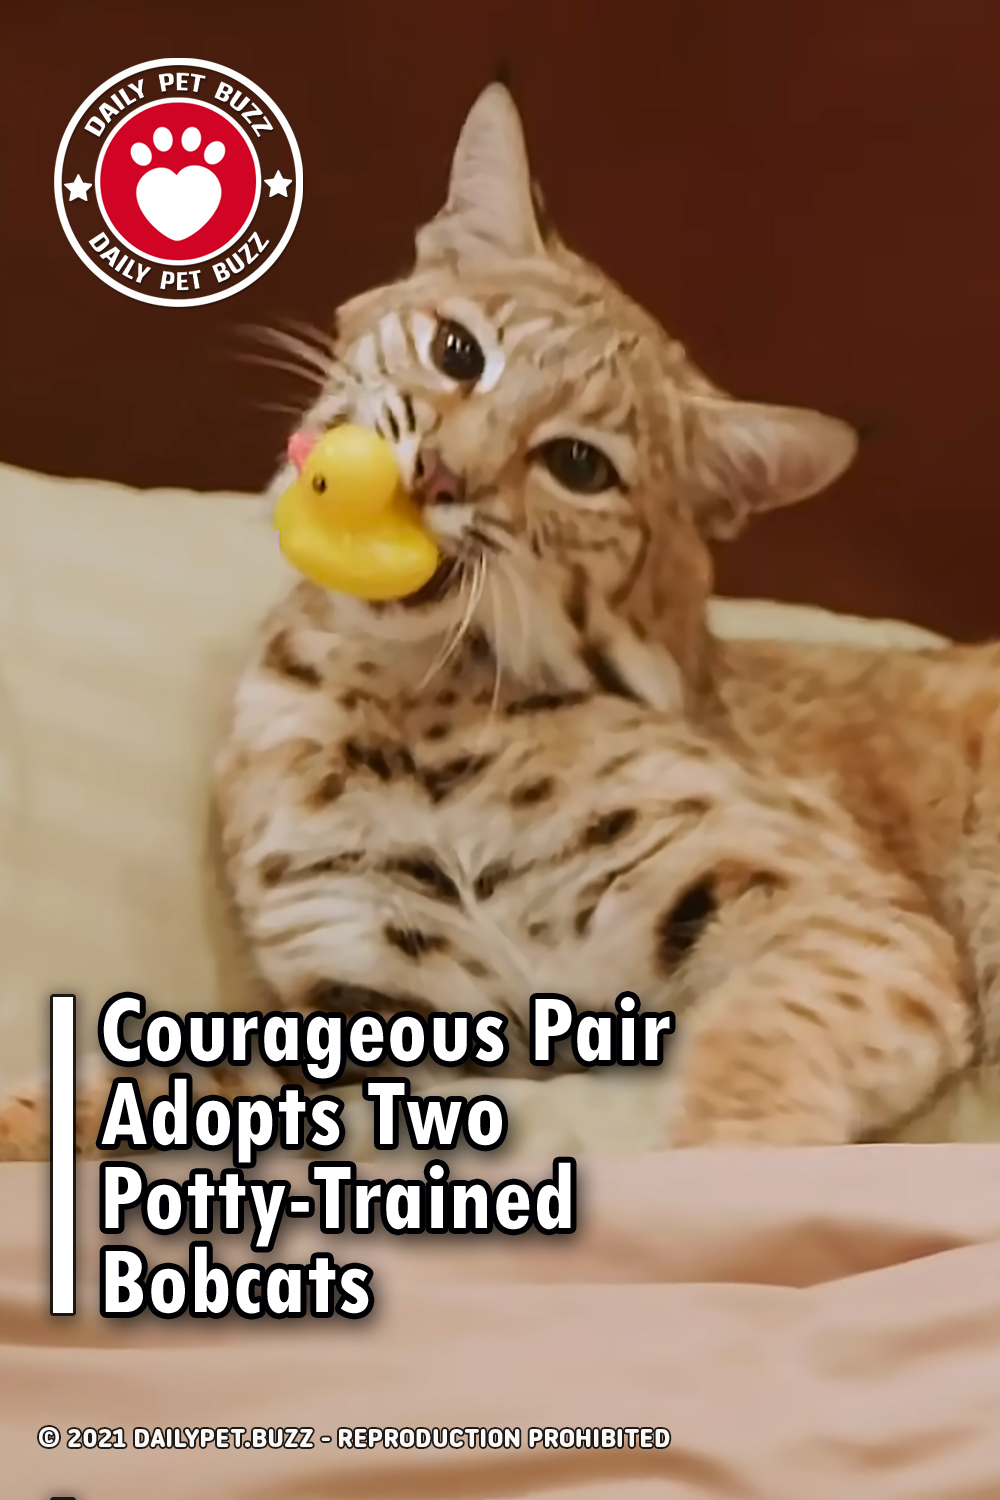 Courageous Pair Adopts Two Potty-Trained Bobcats